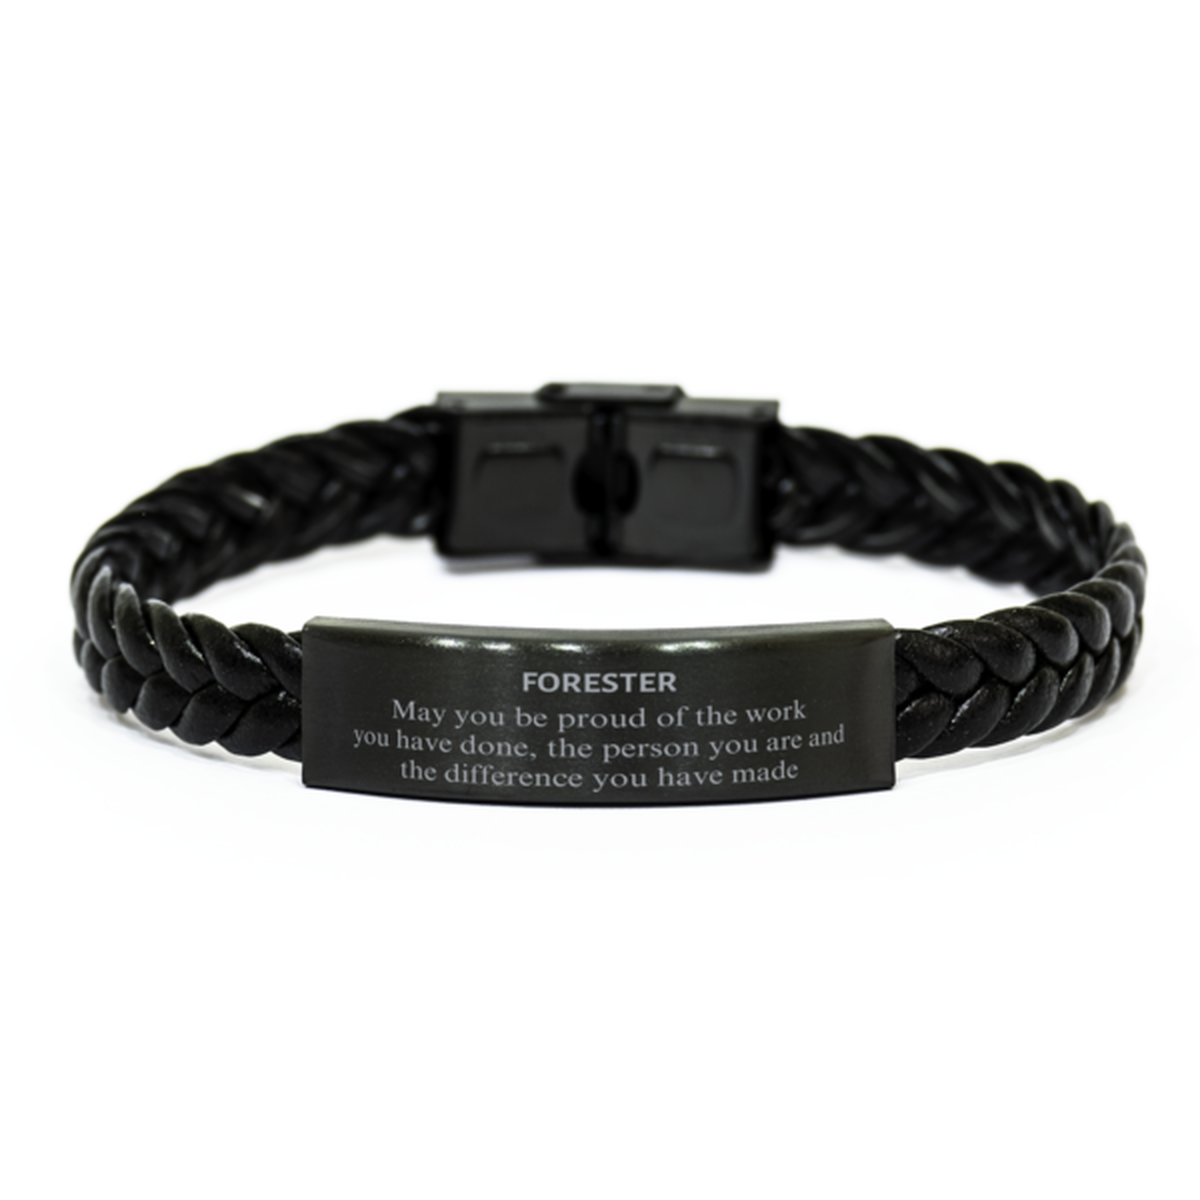 Forester May you be proud of the work you have done, Retirement Forester Braided Leather Bracelet for Colleague Appreciation Gifts Amazing for Forester